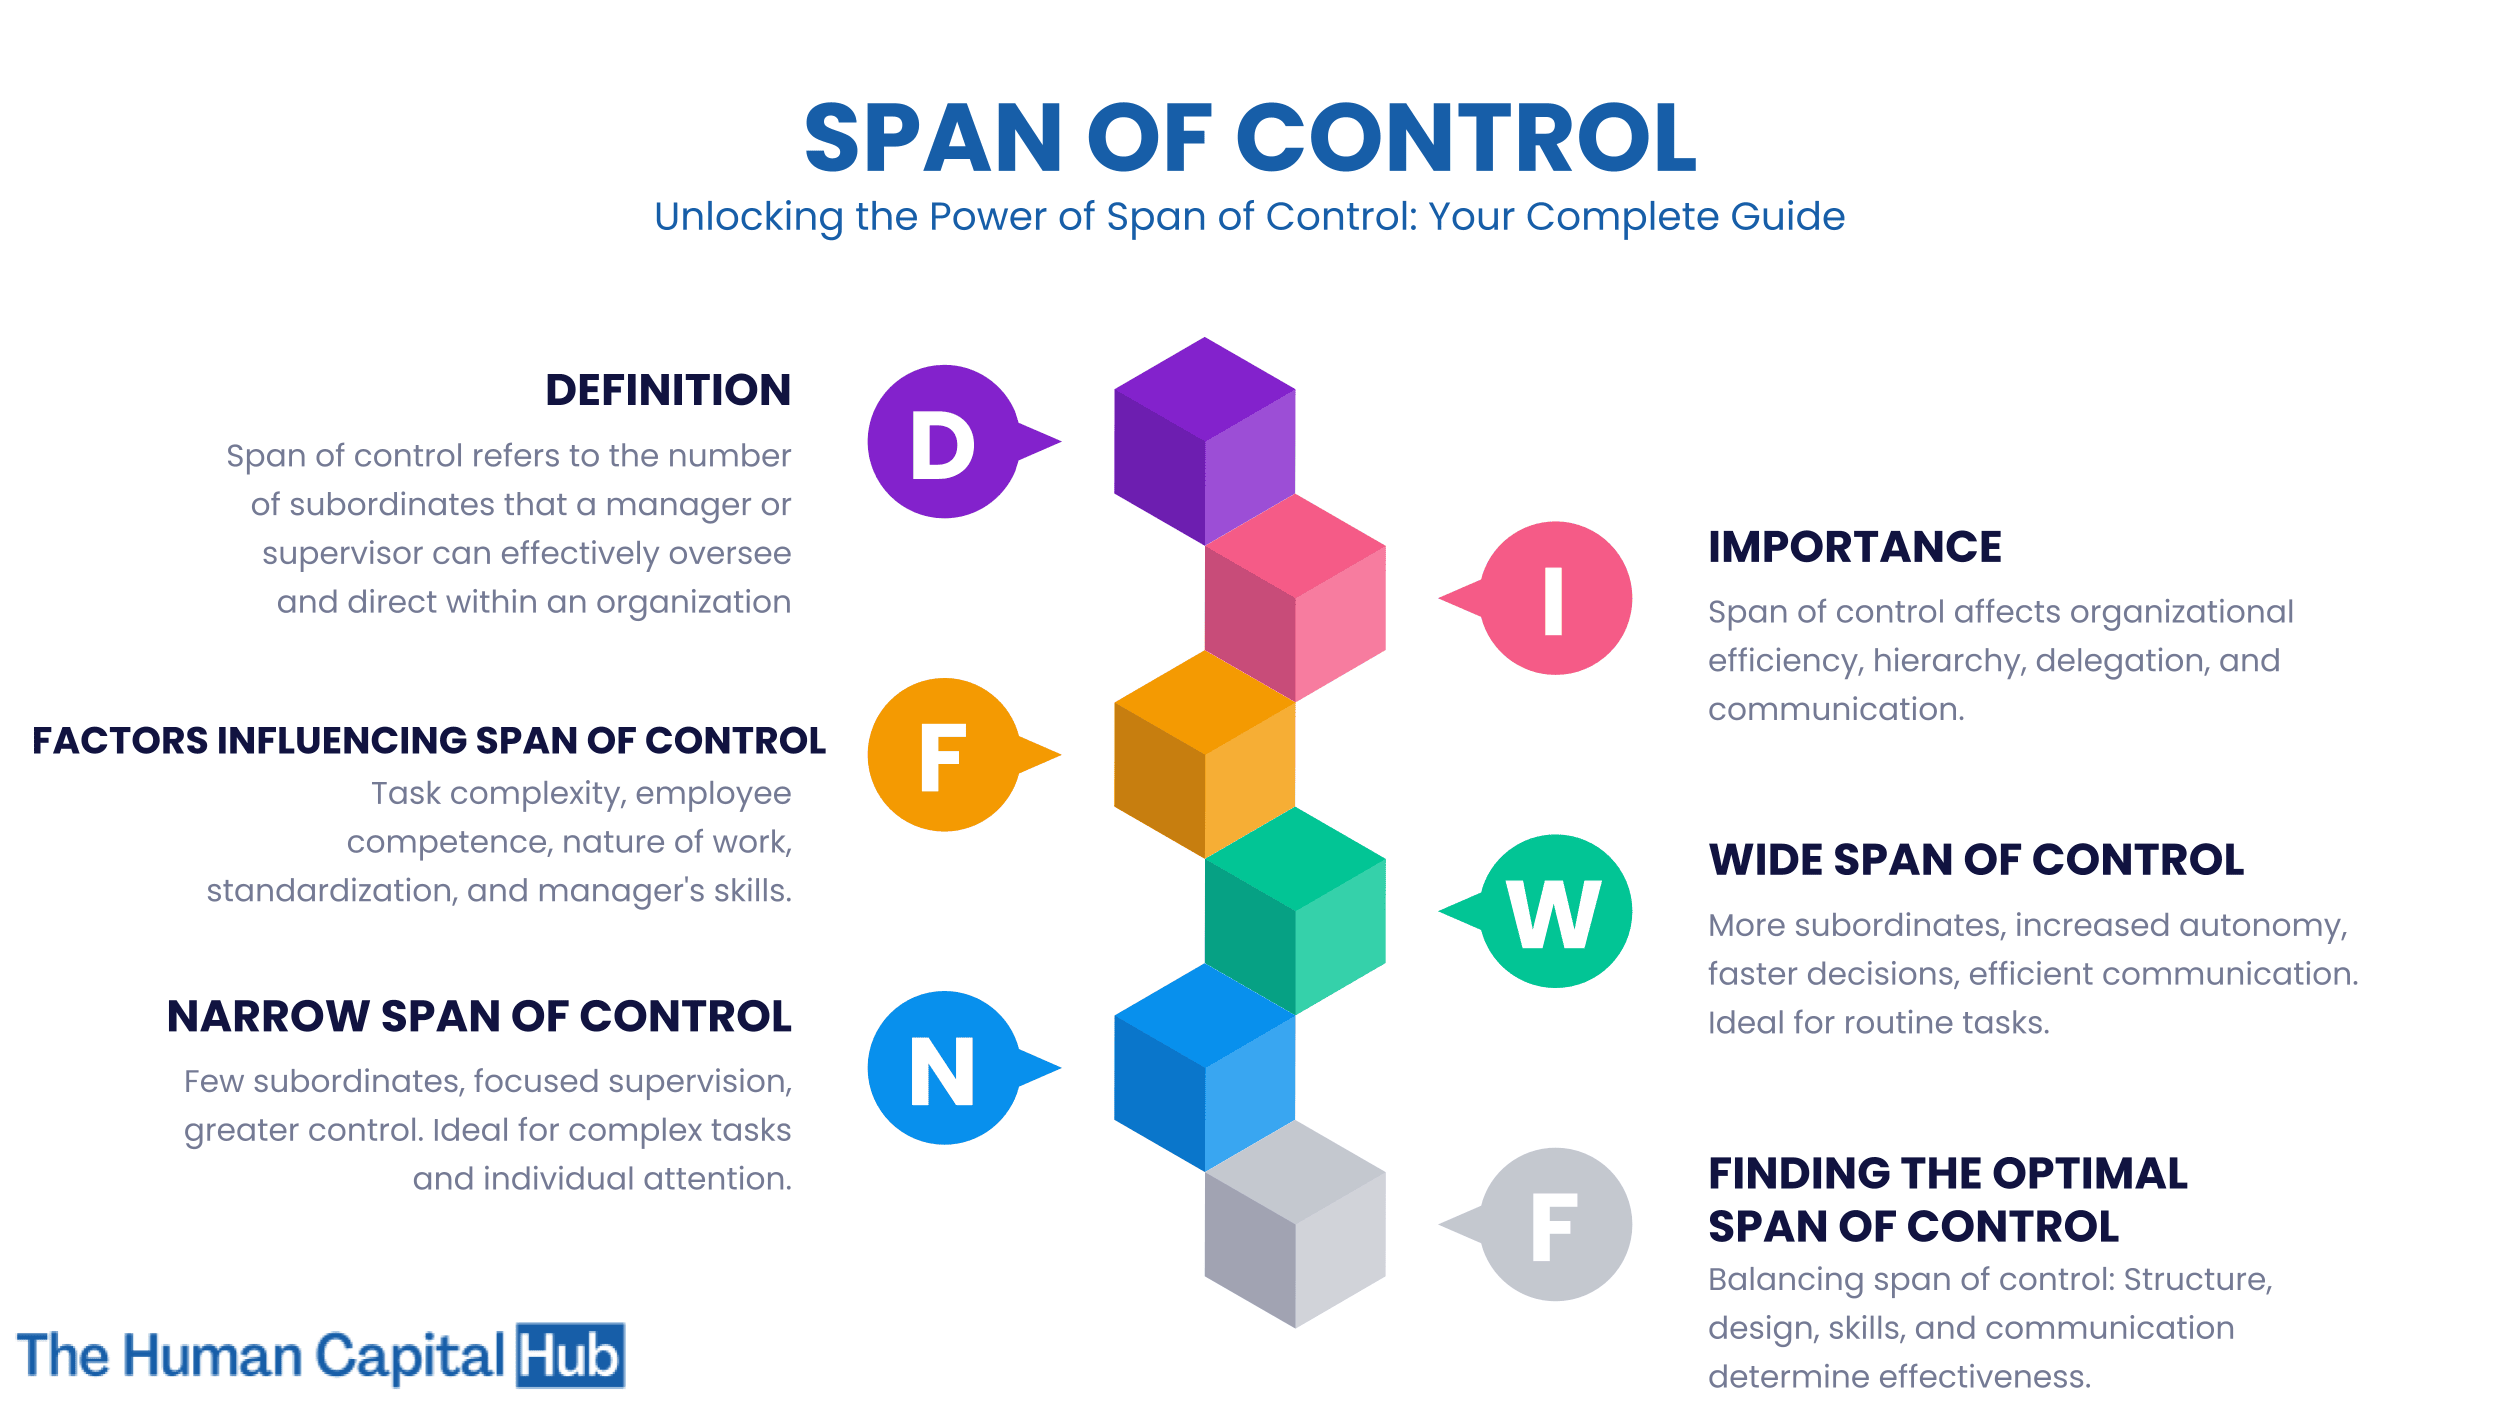 span of control business plan